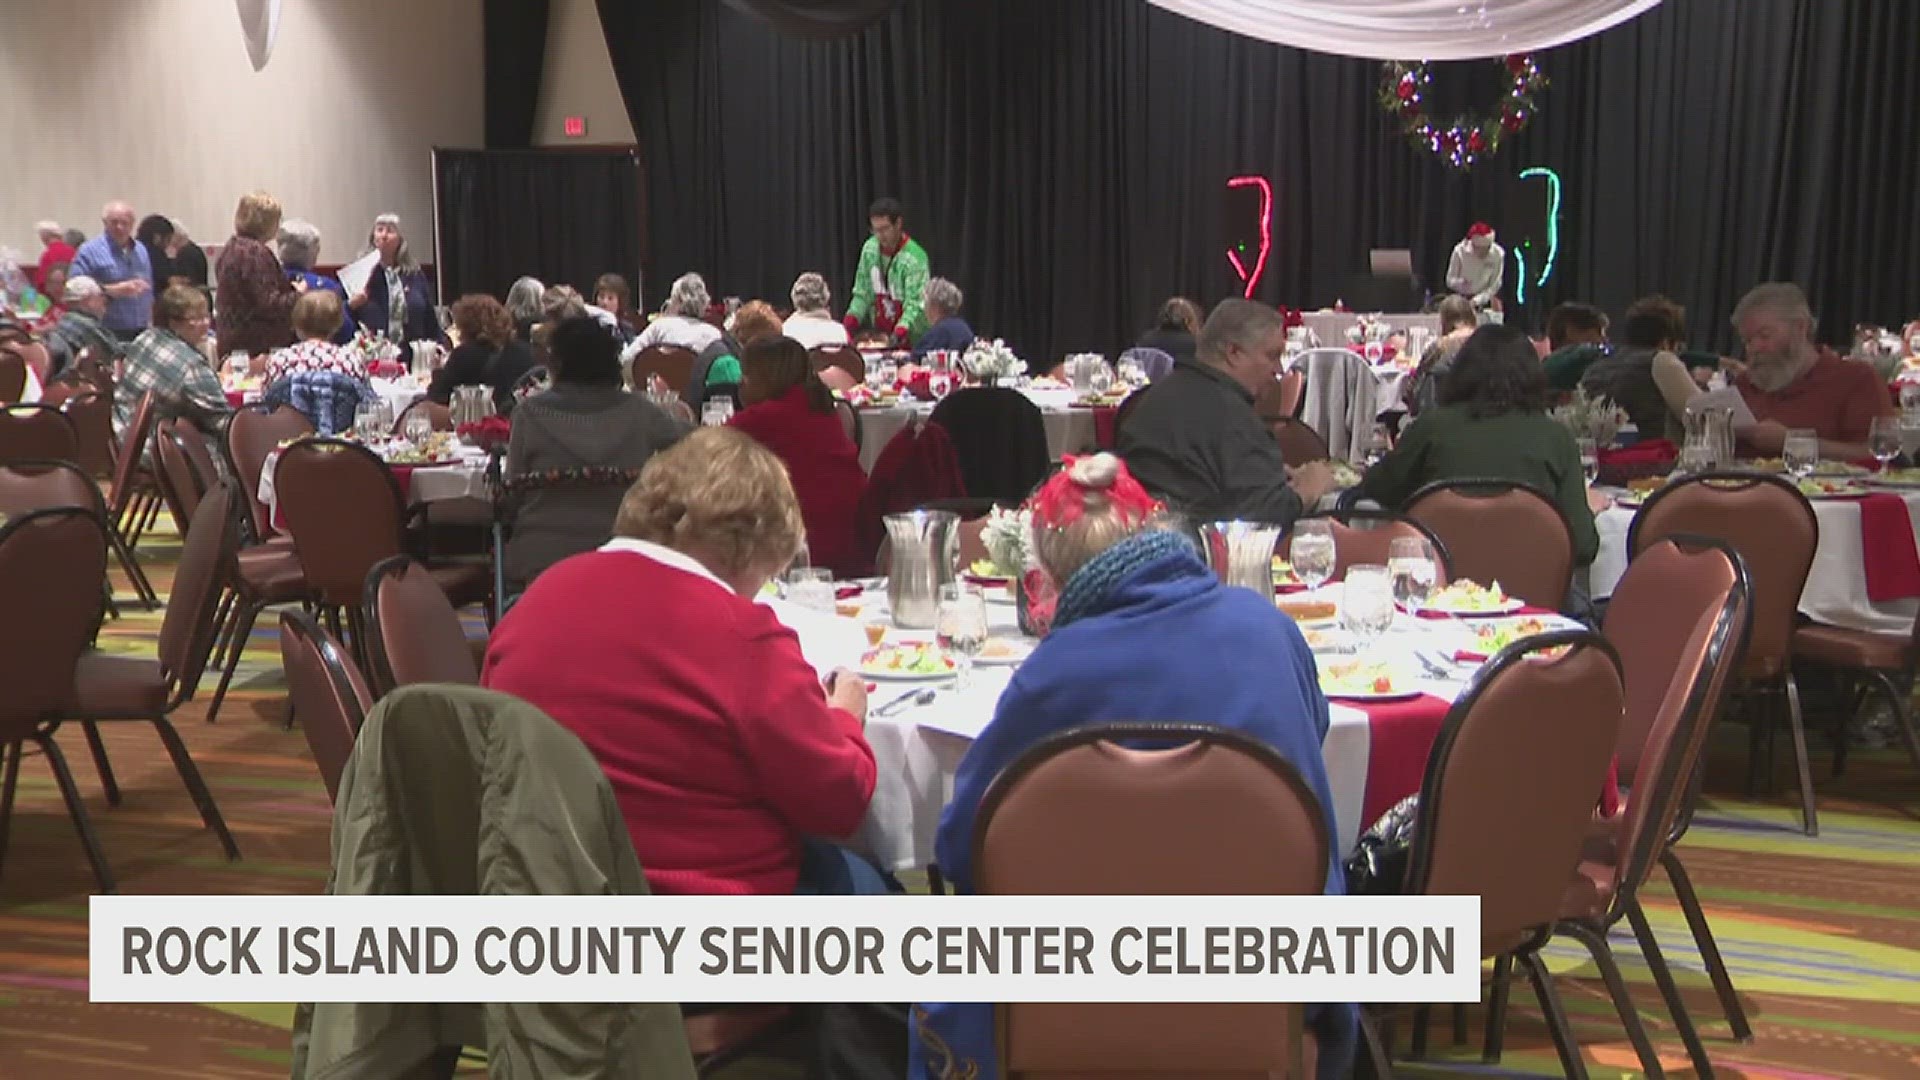 The staff at the center say social isolation is a big problem with seniors and this event gives them a chance to get out and experience some holiday cheer.